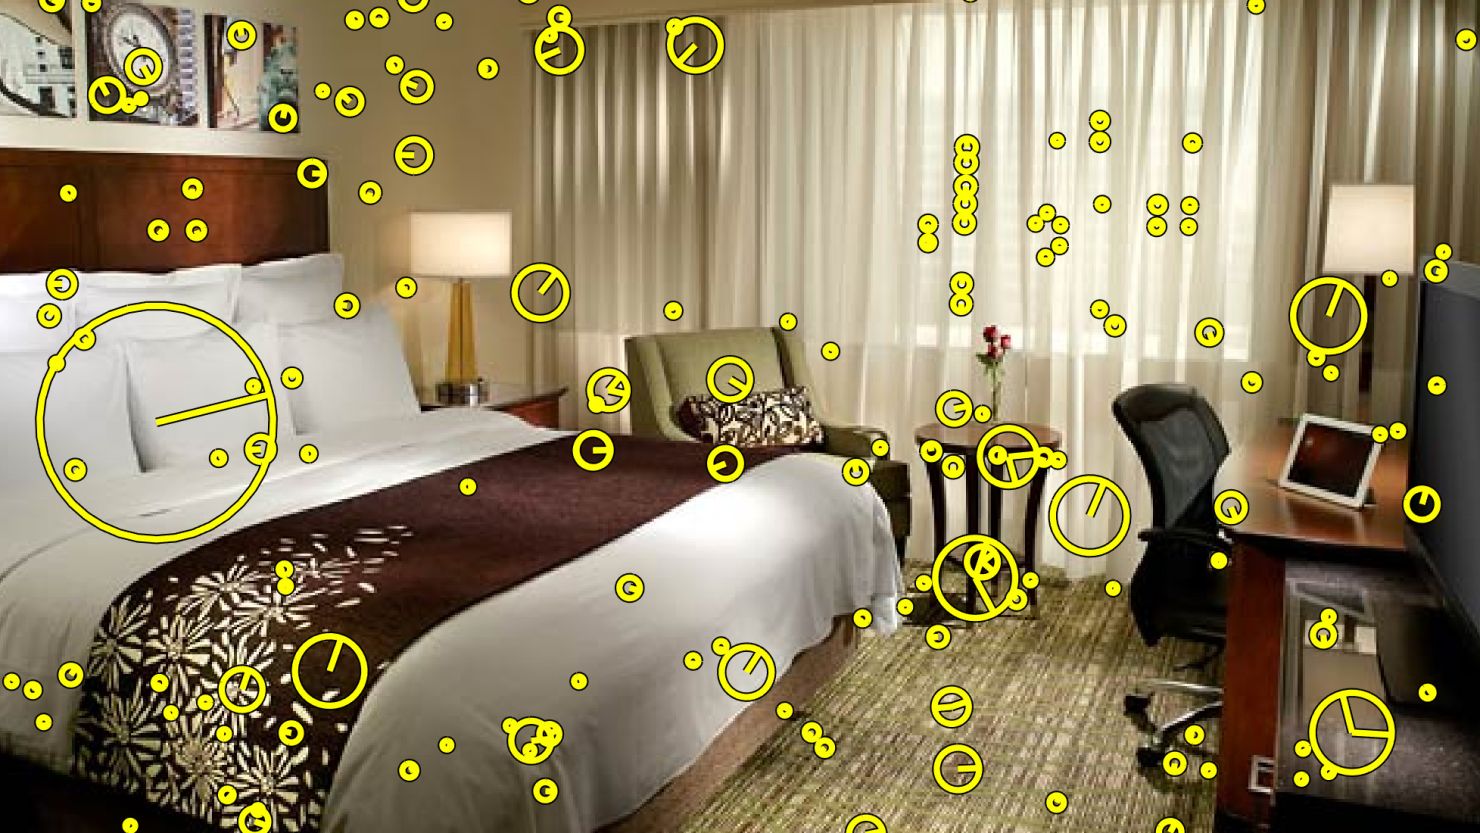 Bedroom Forcedxxx - TraffickCam: Your hotel room photos could stop sex traffickers | CNN  Business